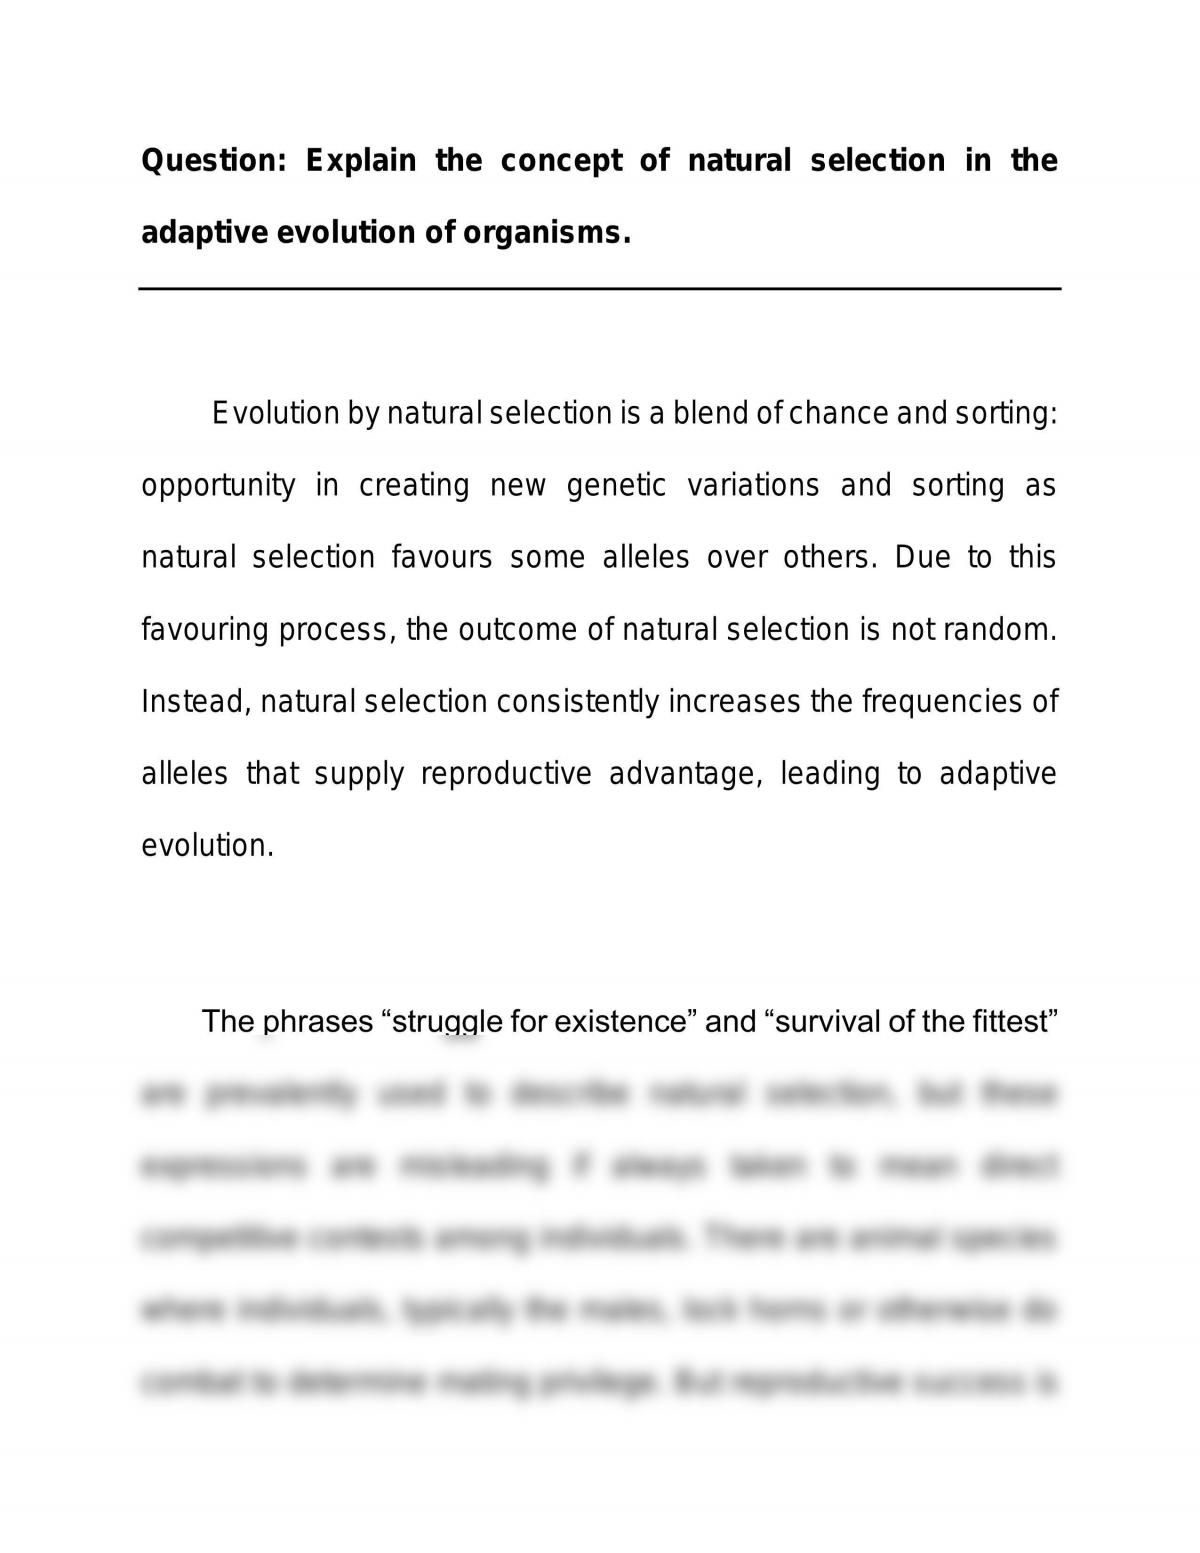 importance of natural selection essay